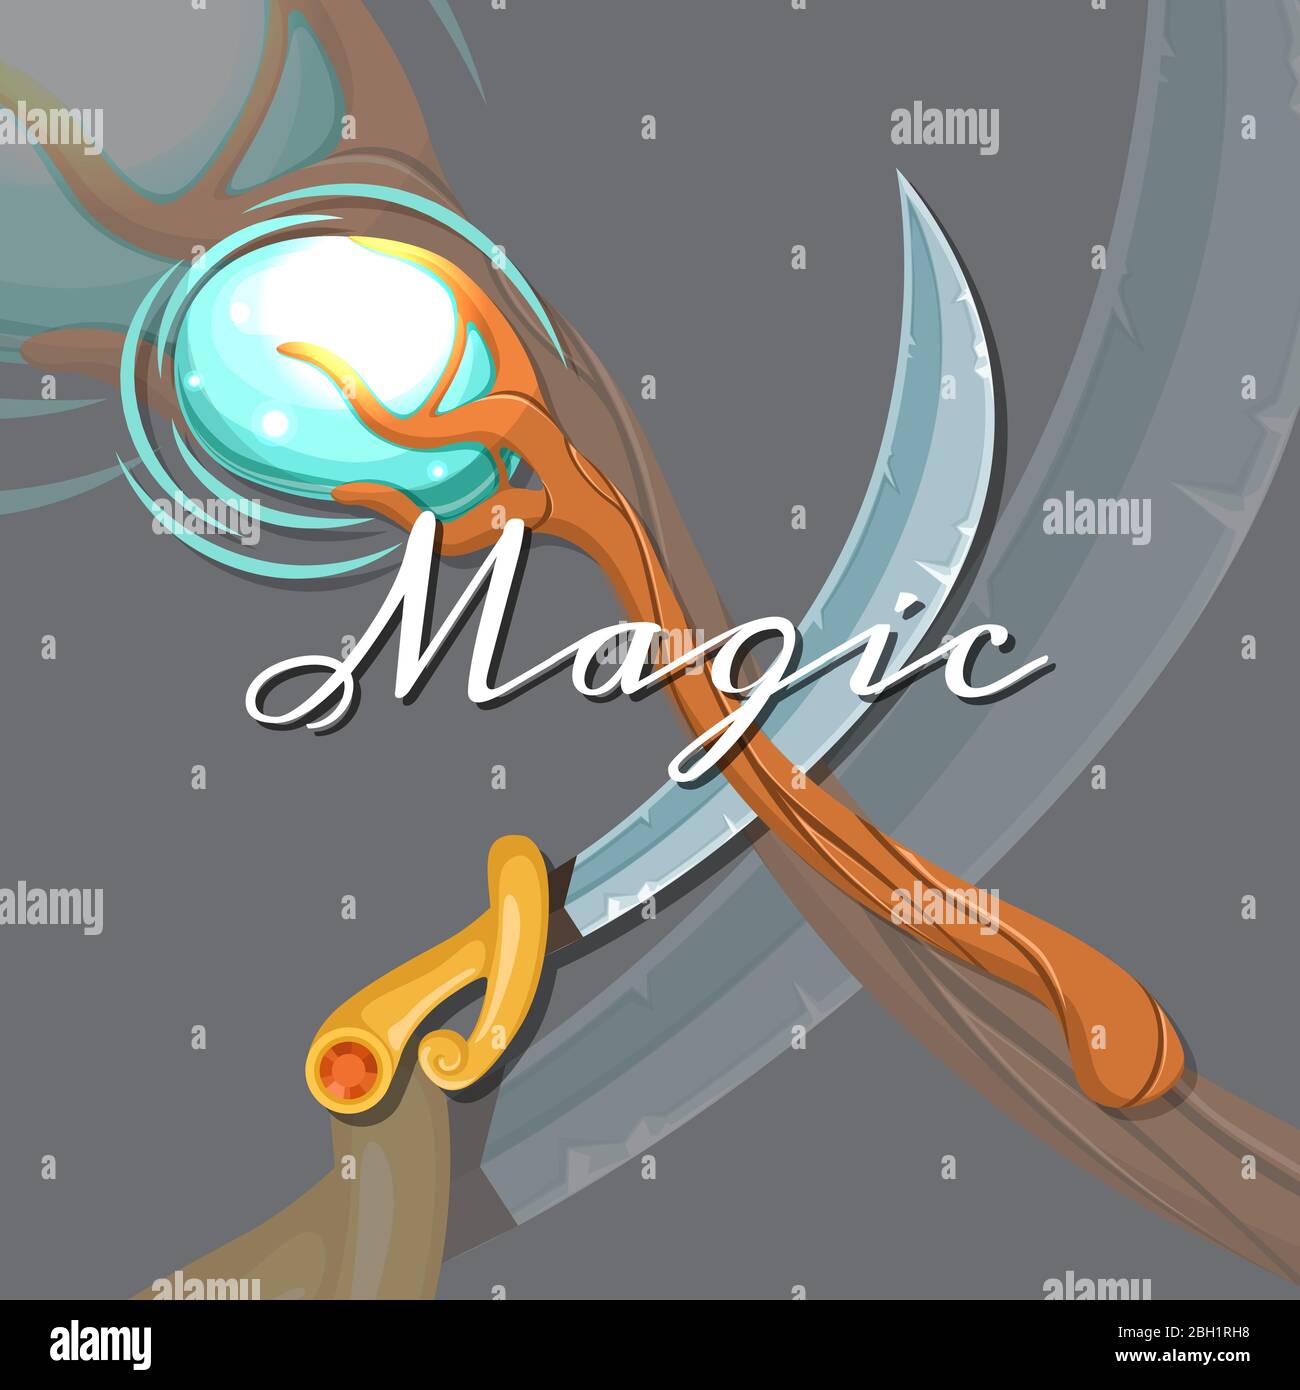 Vector fantasy cartoon style game design medieval crossed magic staff and saber sword elements with lettering and shadows illustration Stock Vector